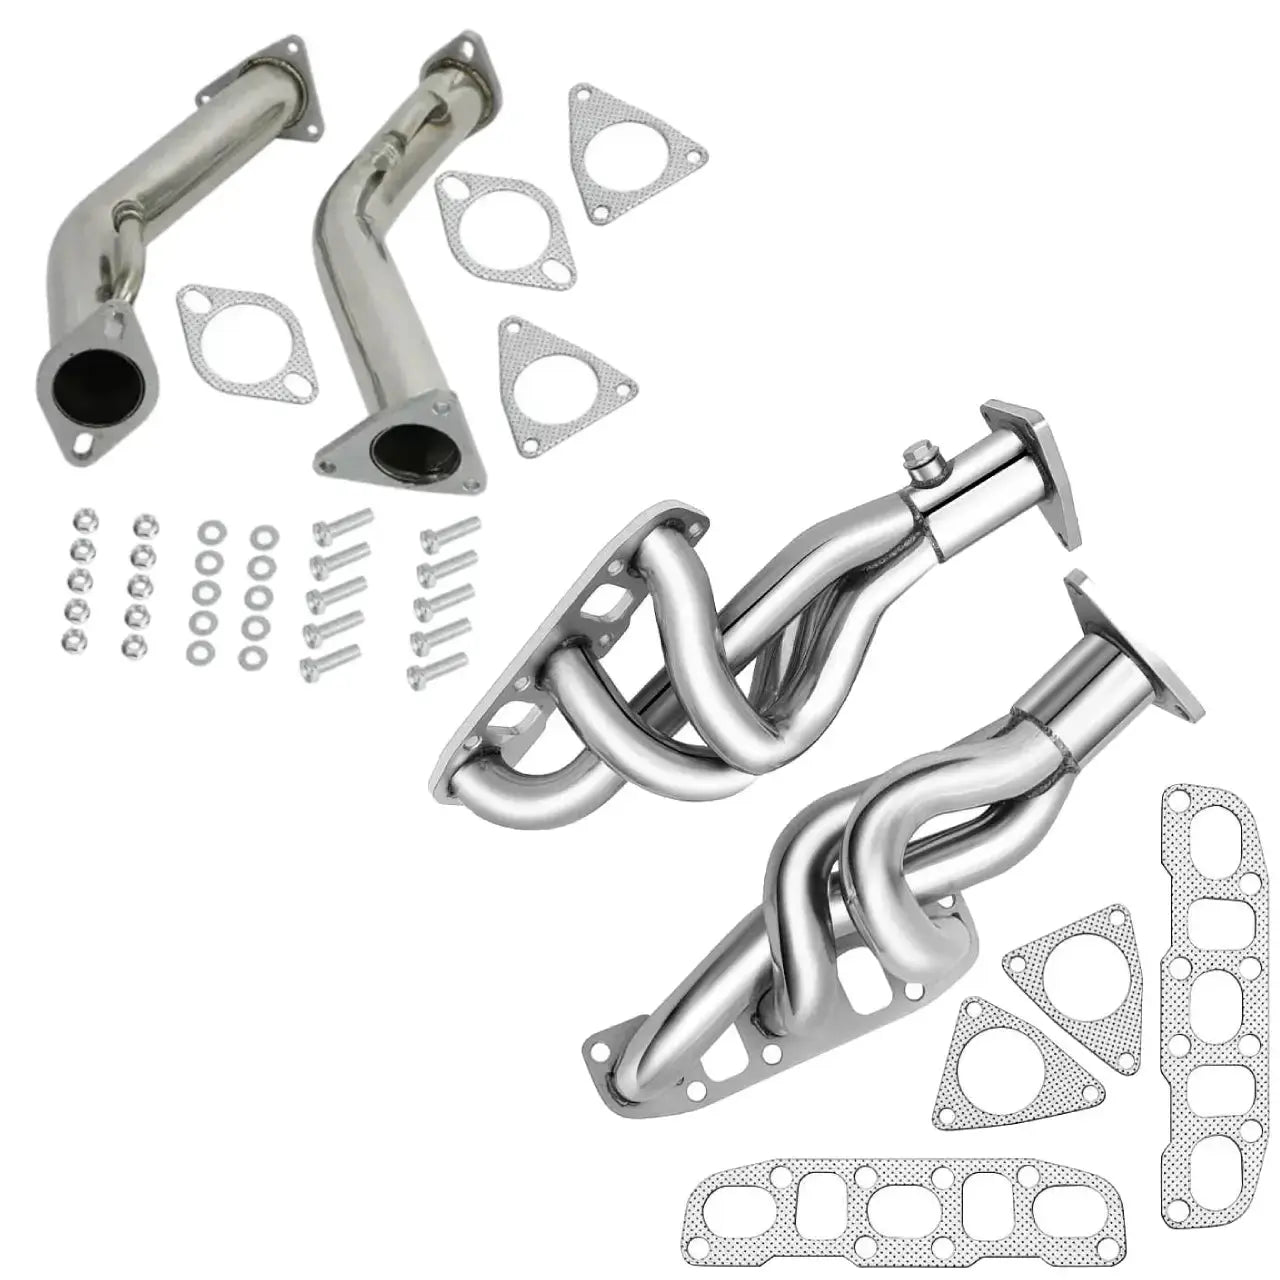 Exhaust Header/Downpipe Exhaust All-In-One Kit for 2009-2013 Nissan 370Z /Infiniti G37 G37X G37XS 3.7L Flashark